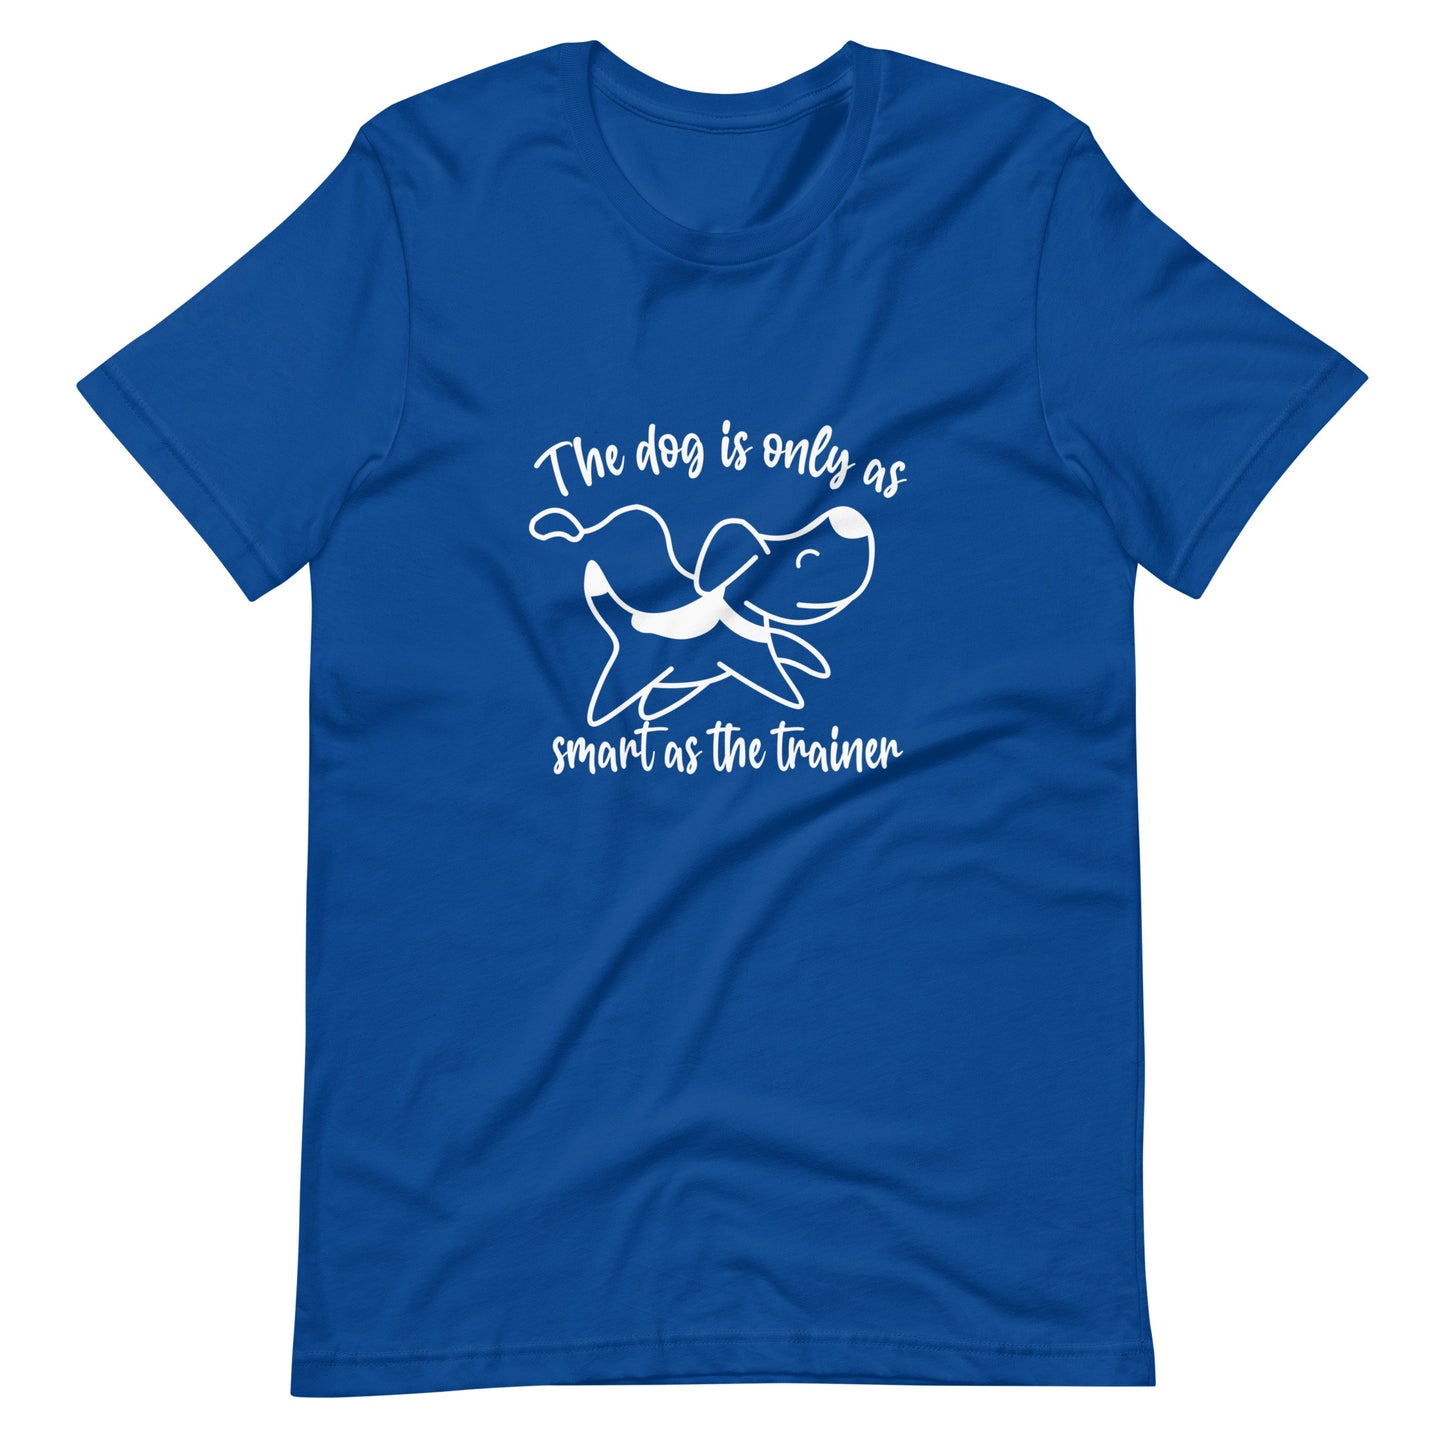 As smart as the trainer - Unisex t-shirt